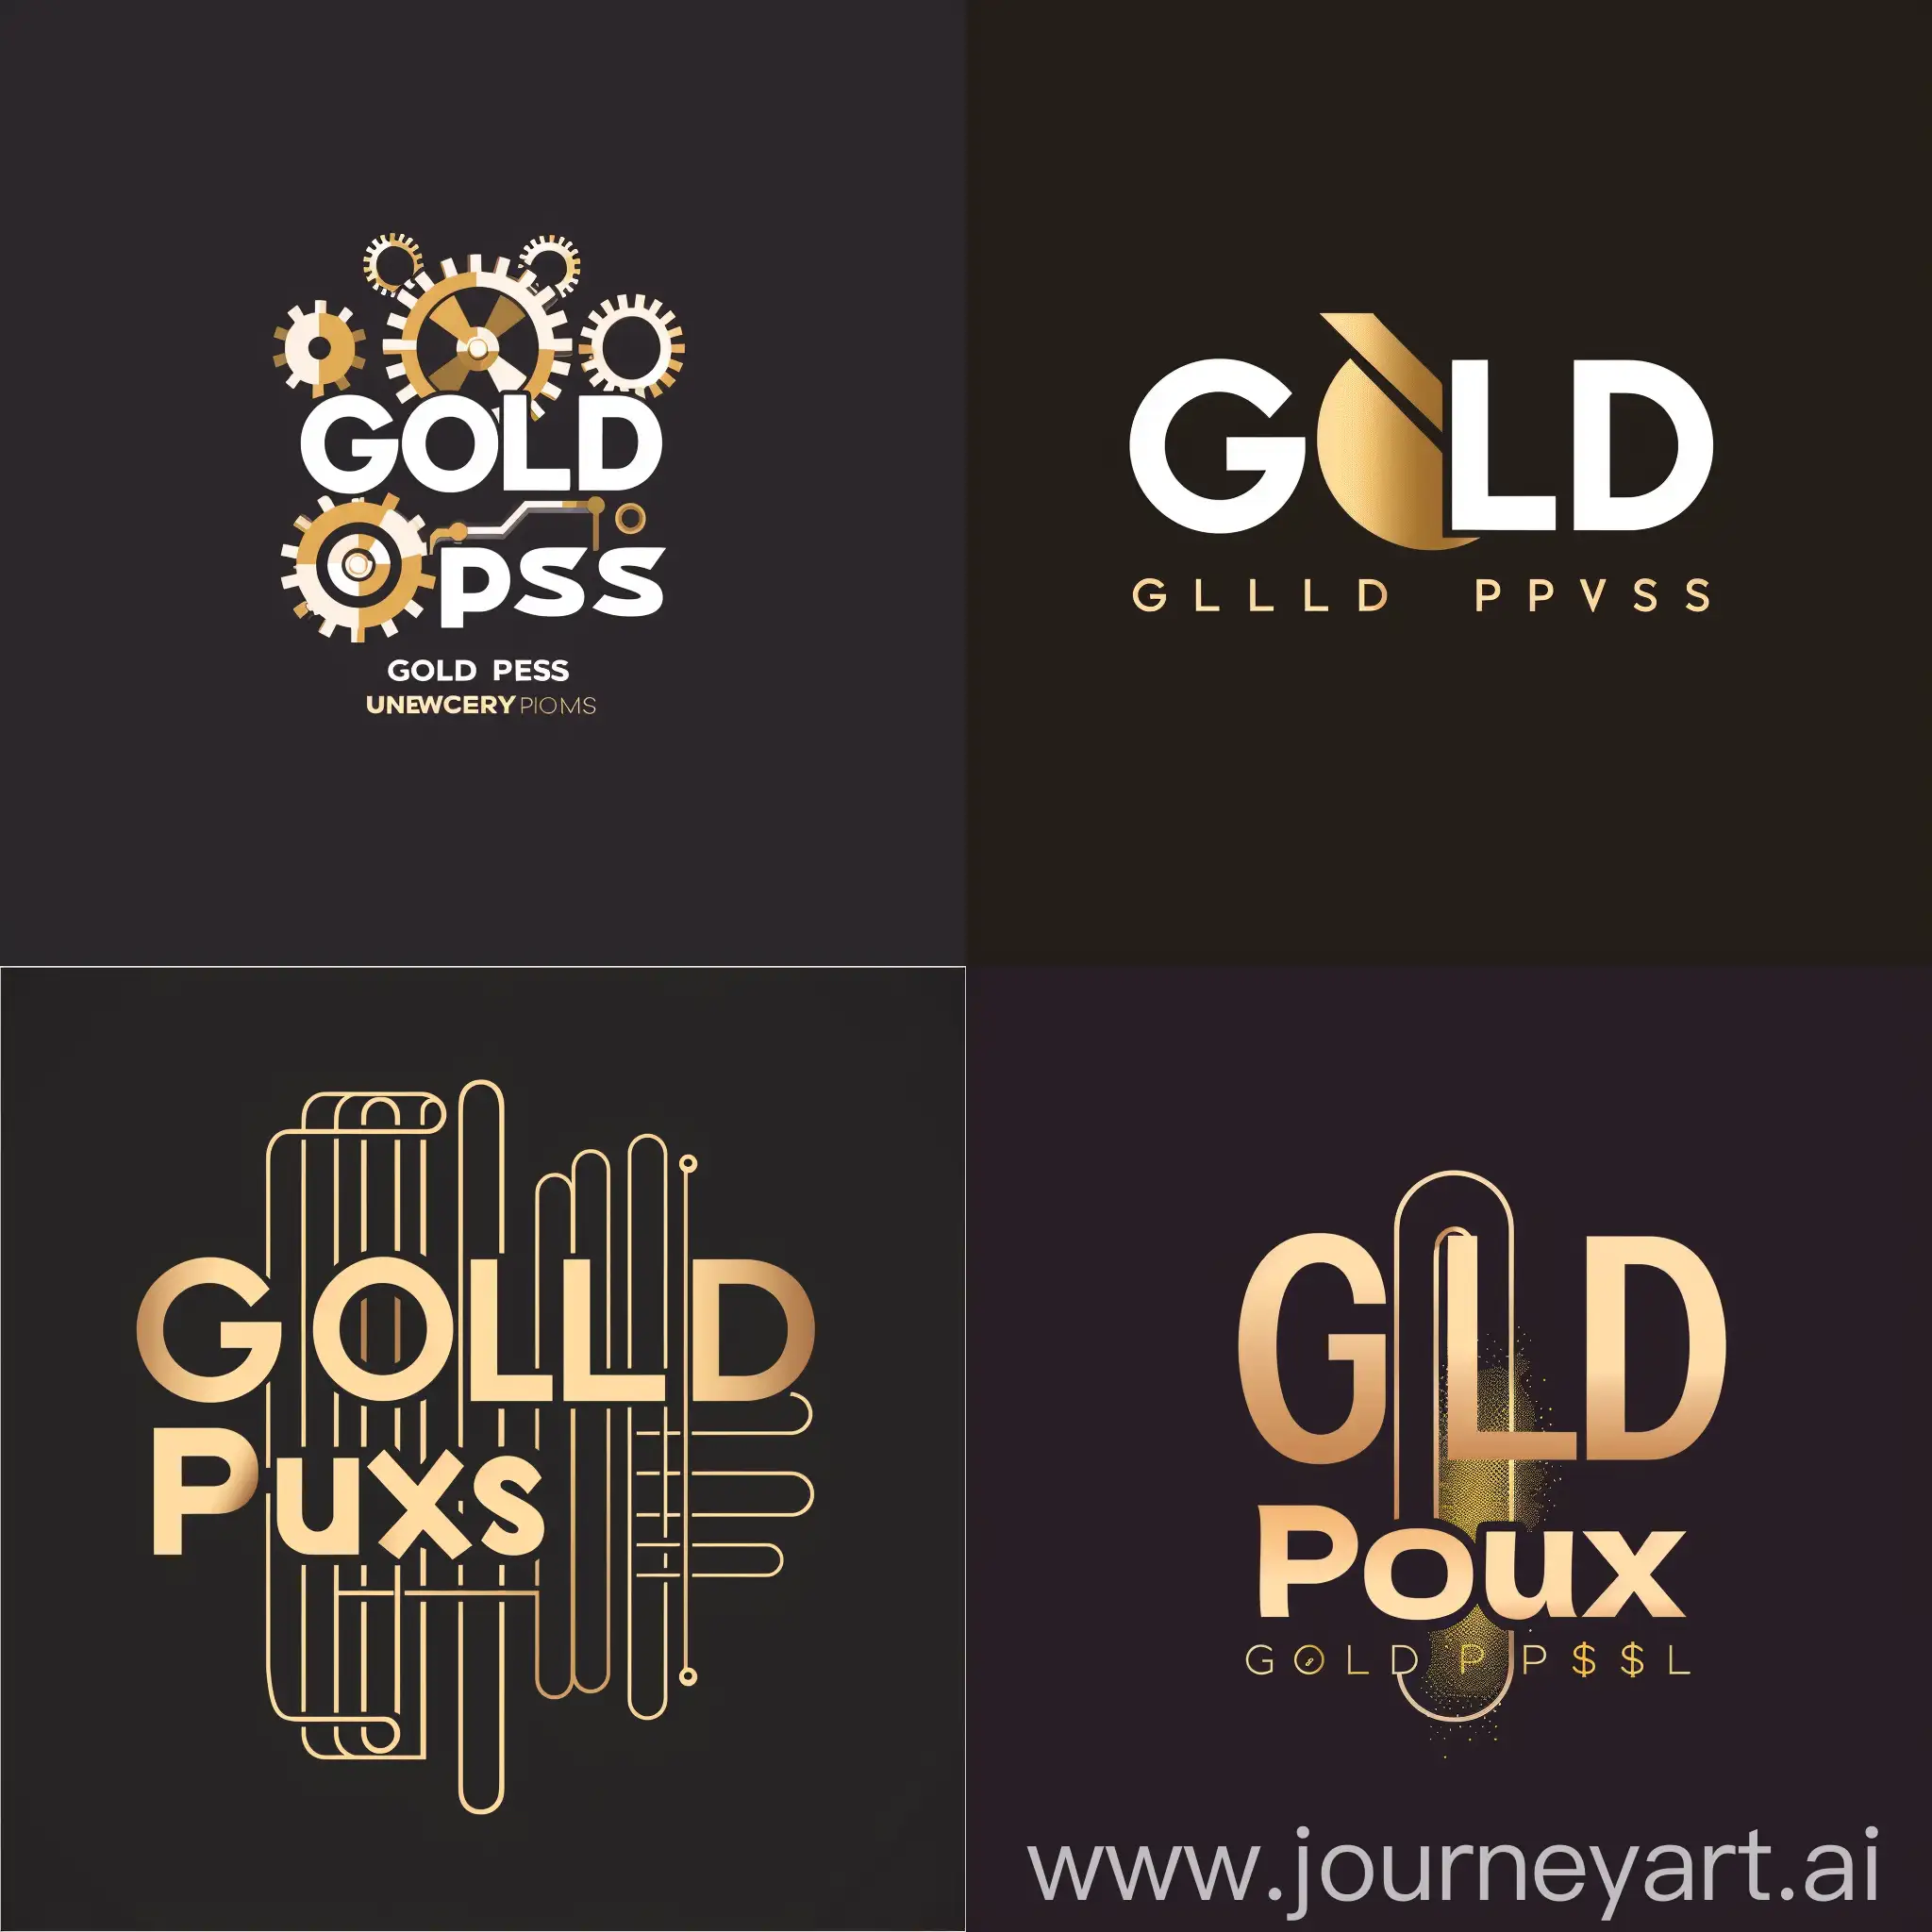 Gold Plus is a machine-building company that operates in the field of producing gold-making machines. I want you to design a logo for me that is inspired by industry and gold